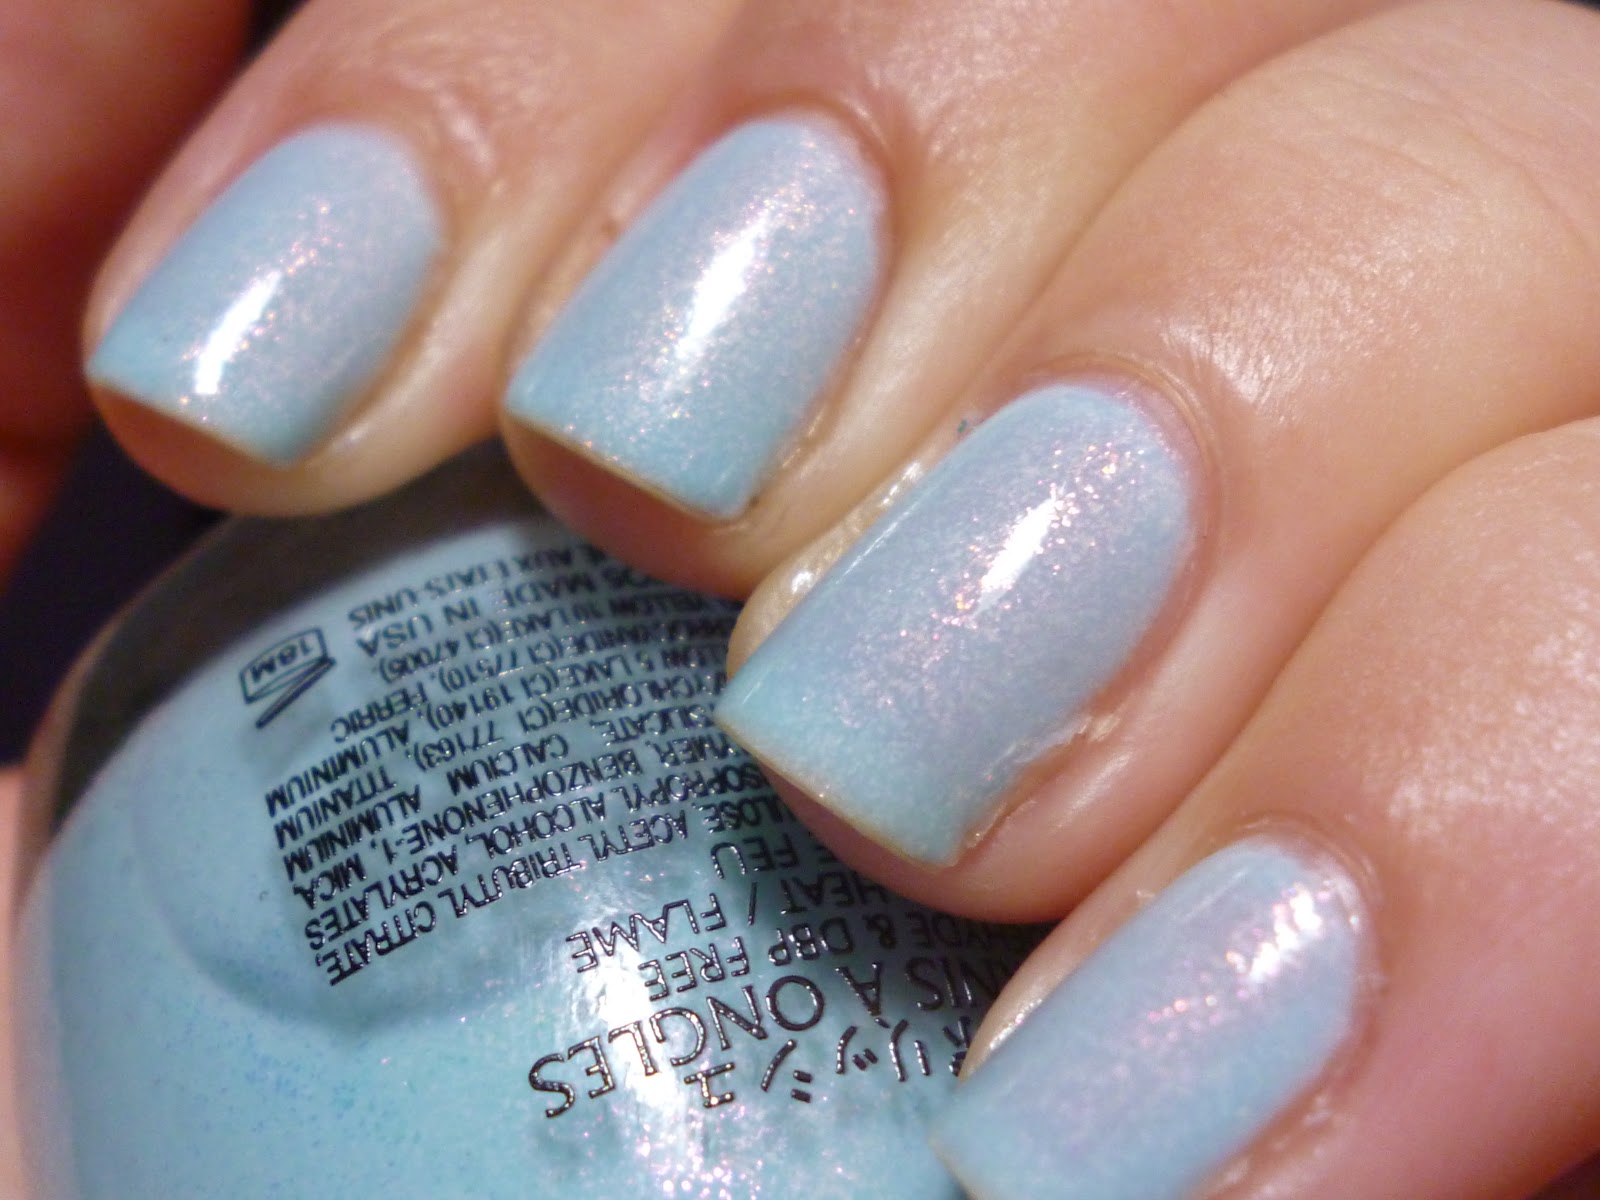 8. Sinful Colors Professional Nail Polish in "Cinderella" - wide 9